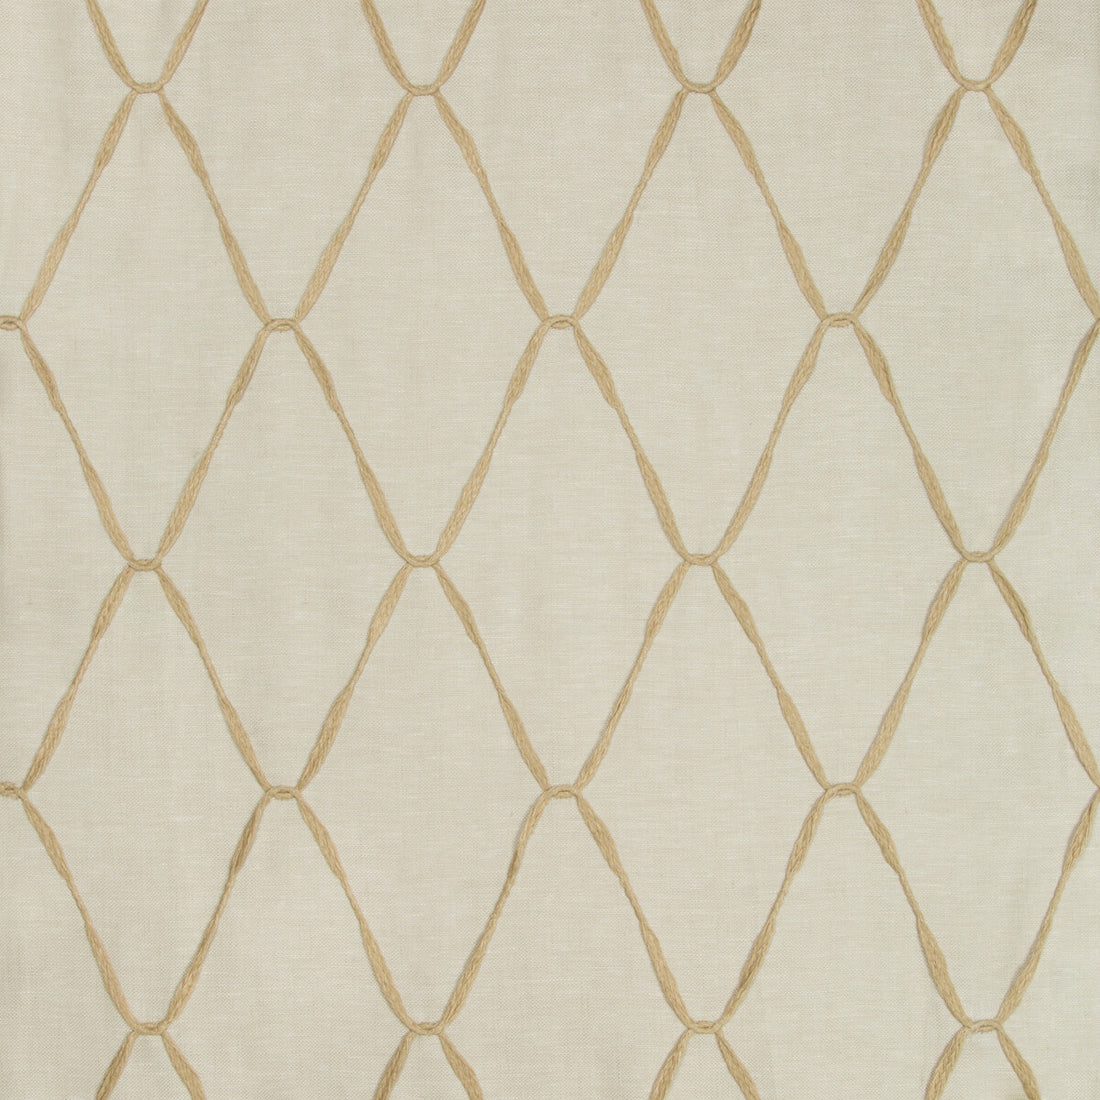 Looped Ribbons fabric in linen color - pattern 4476.16.0 - by Kravet Couture in the Sue Firestone Malibu collection